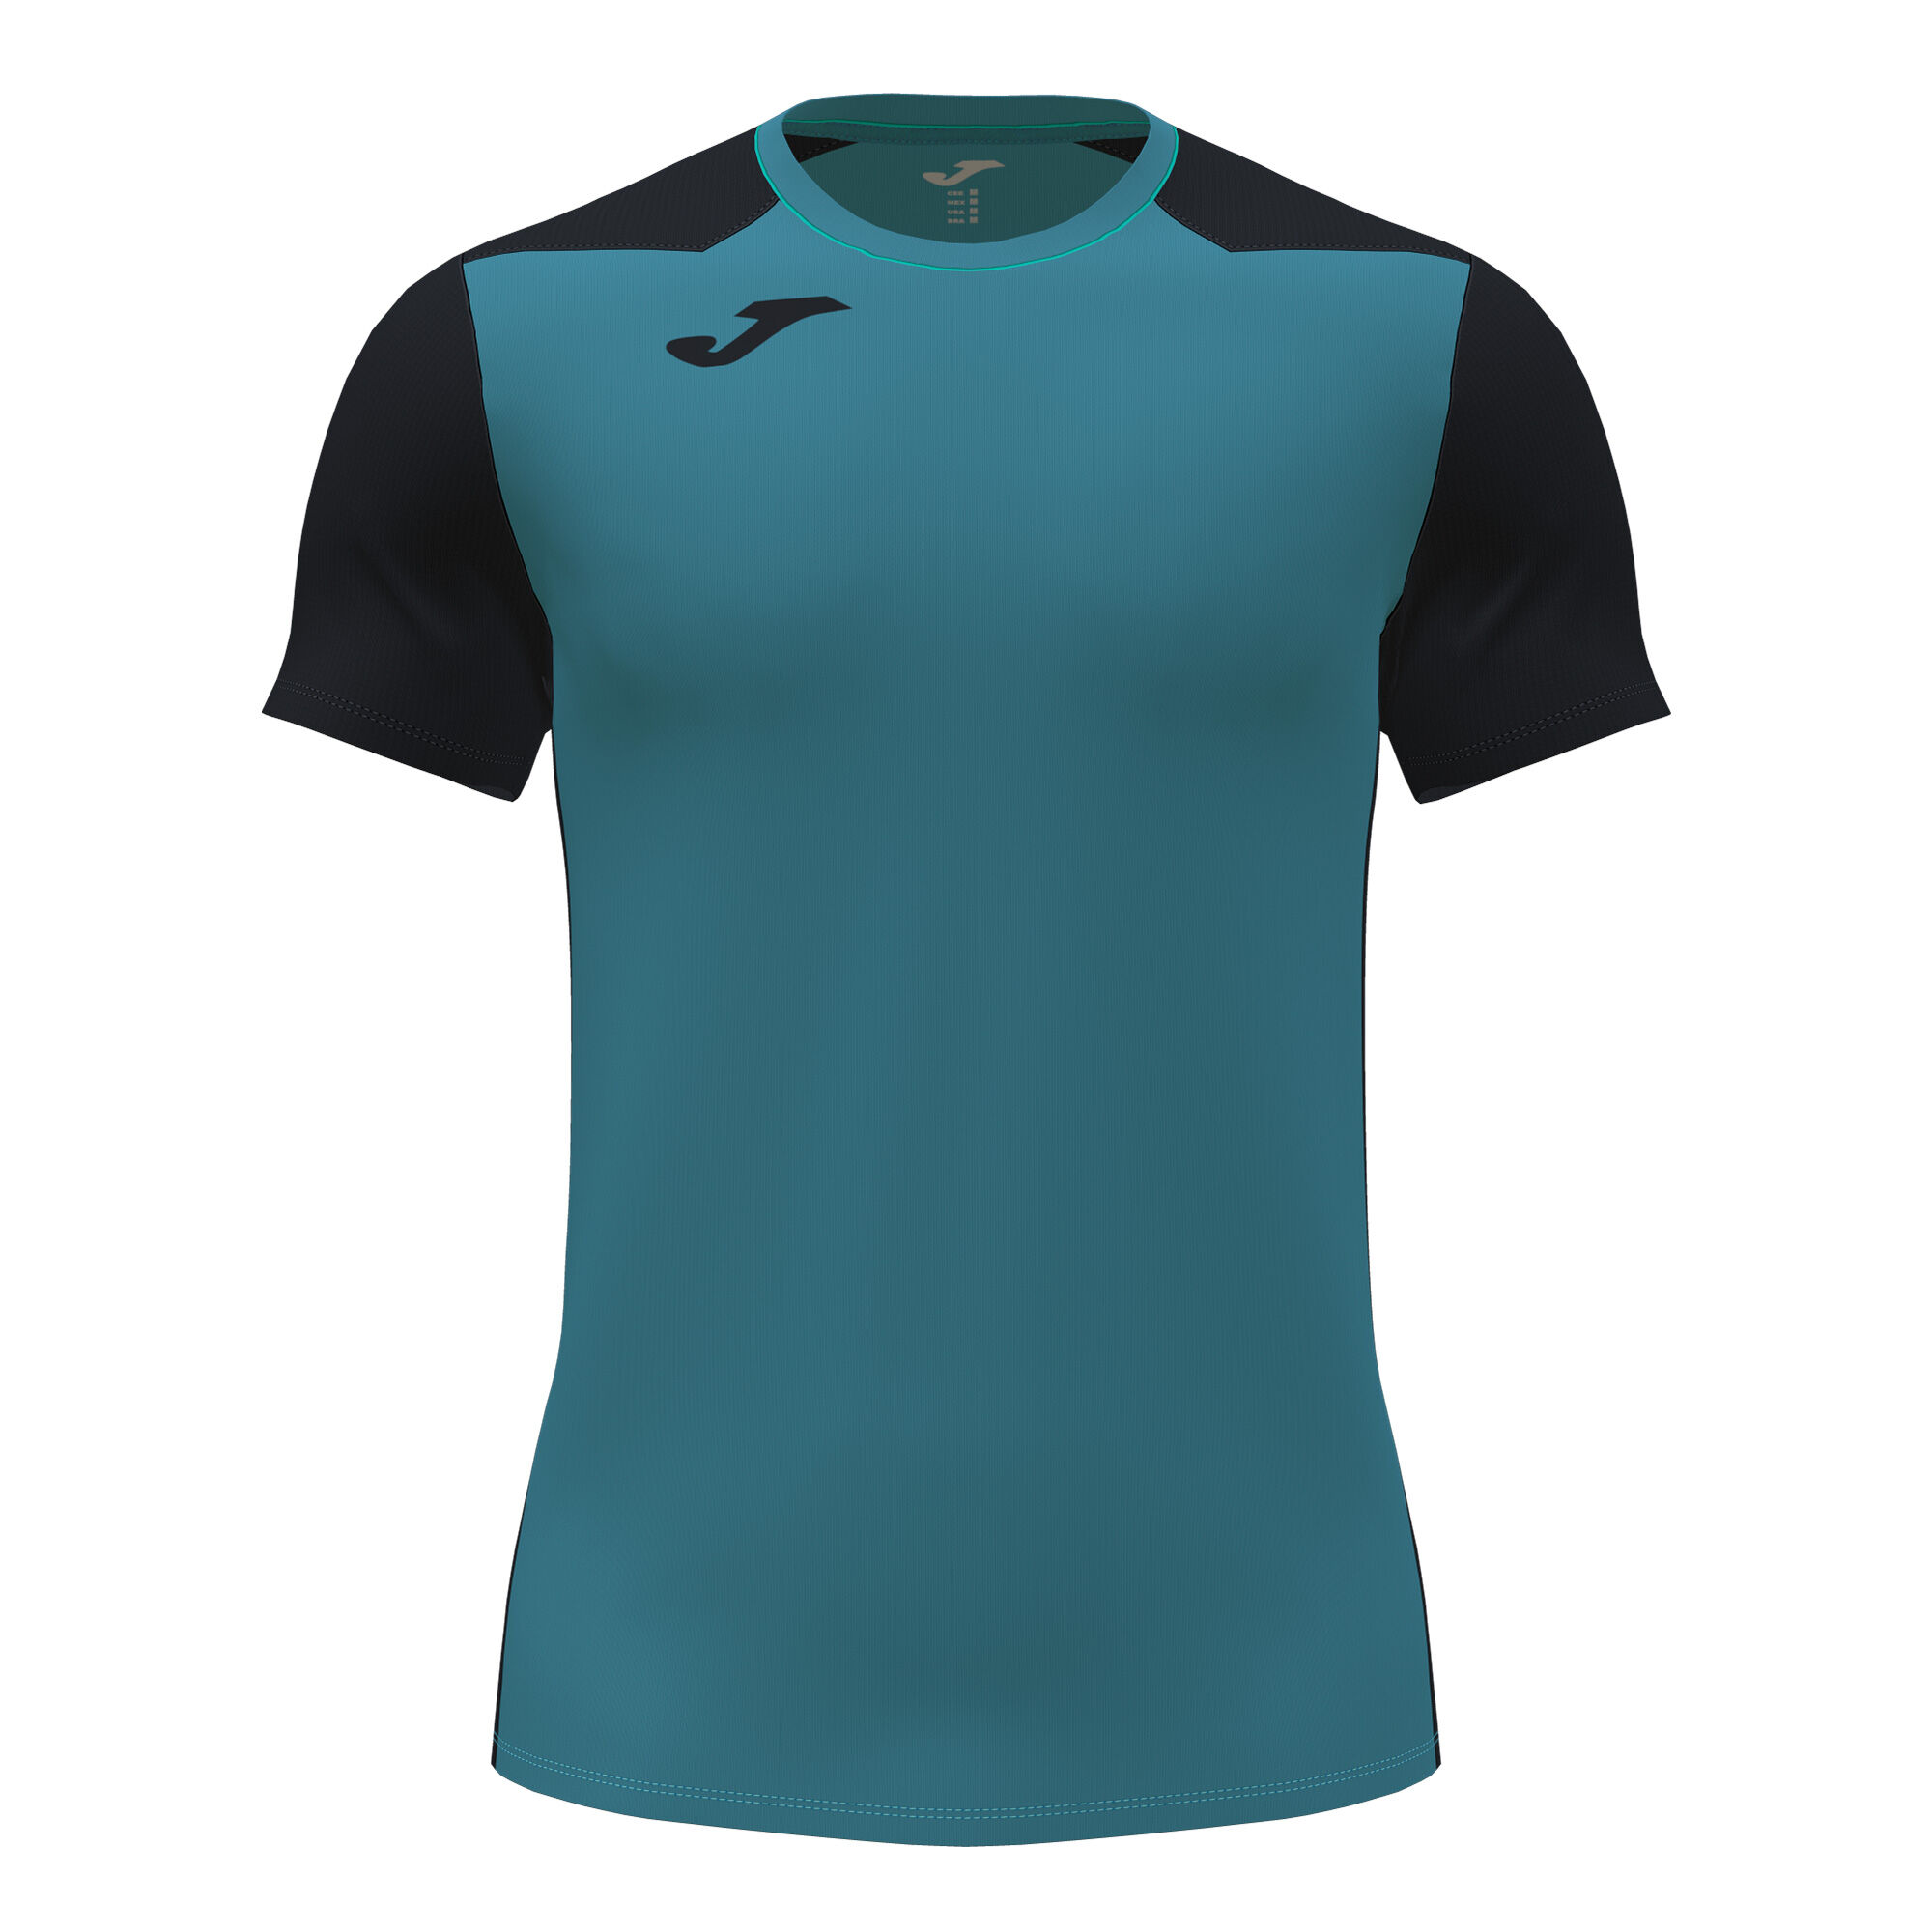 MAILLOT MANCHES COURTES HOMME RECORD II TURQUOISE NOIR